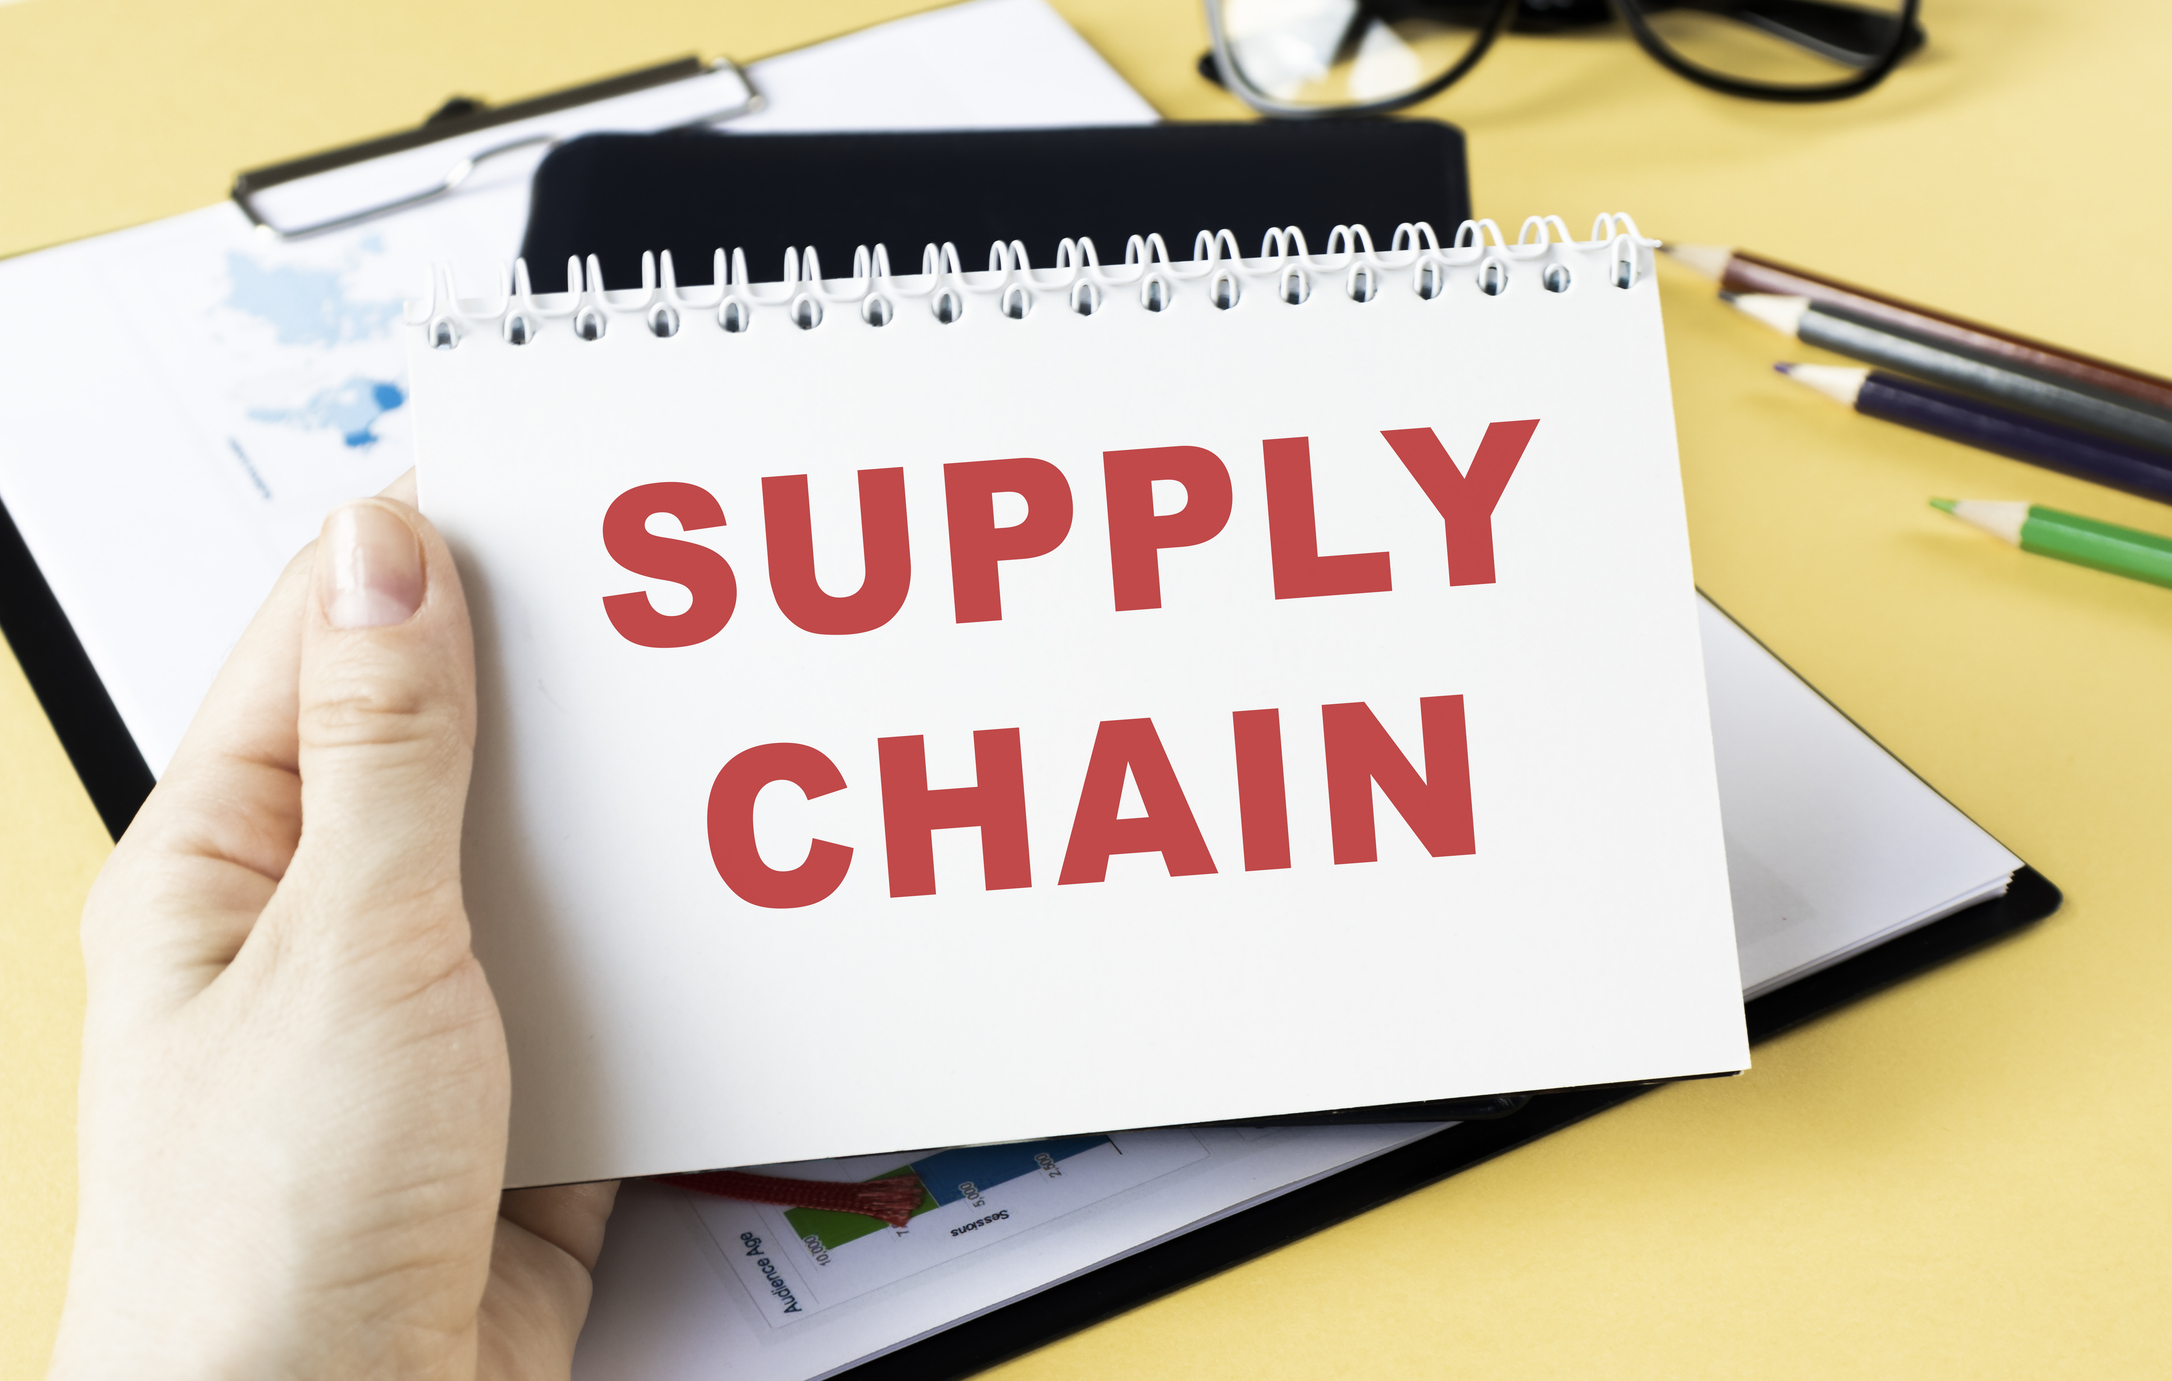 A complete decoupling of supply chains from China virtually impossible